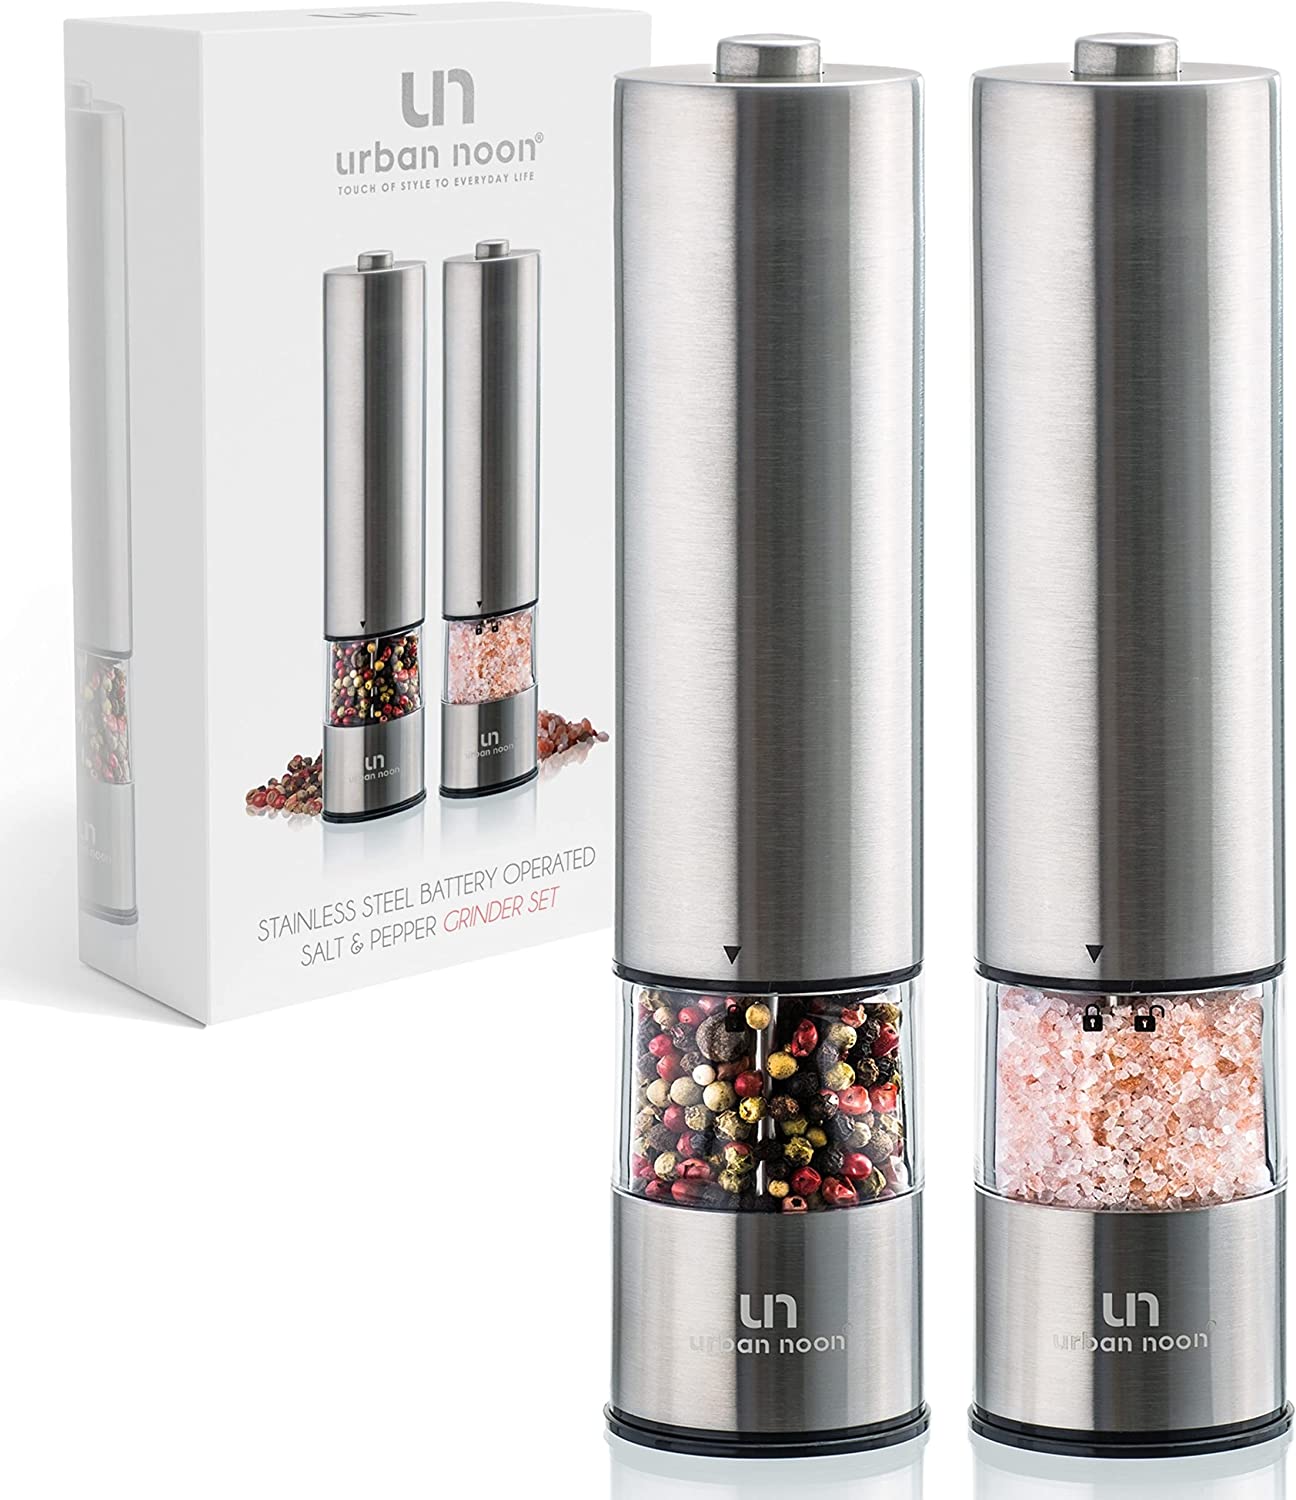 Flafster Kitchen Battery Operated Salt and Pepper Grinder Set - Electric Stainless Steel